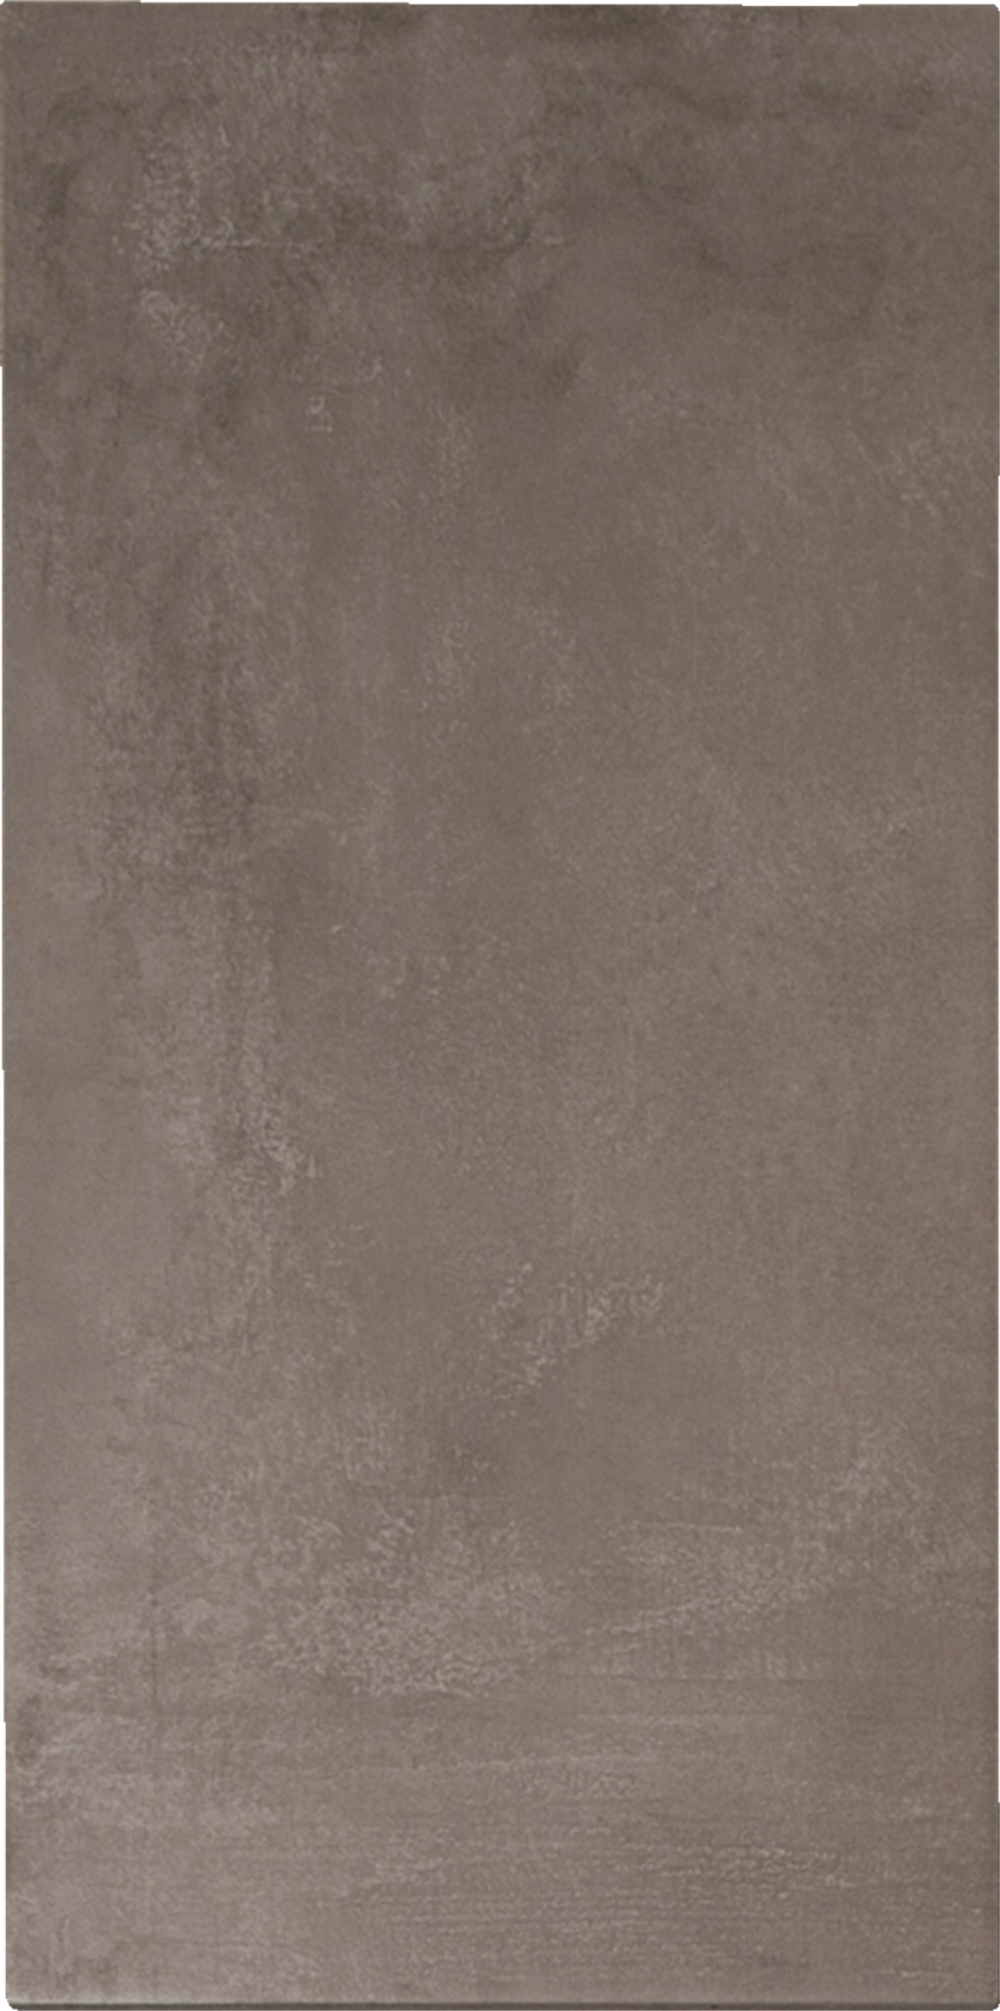 Deals on Tranzit Taupe - 31,5 x 61,5 cm. from Davidsen at 195 kr.